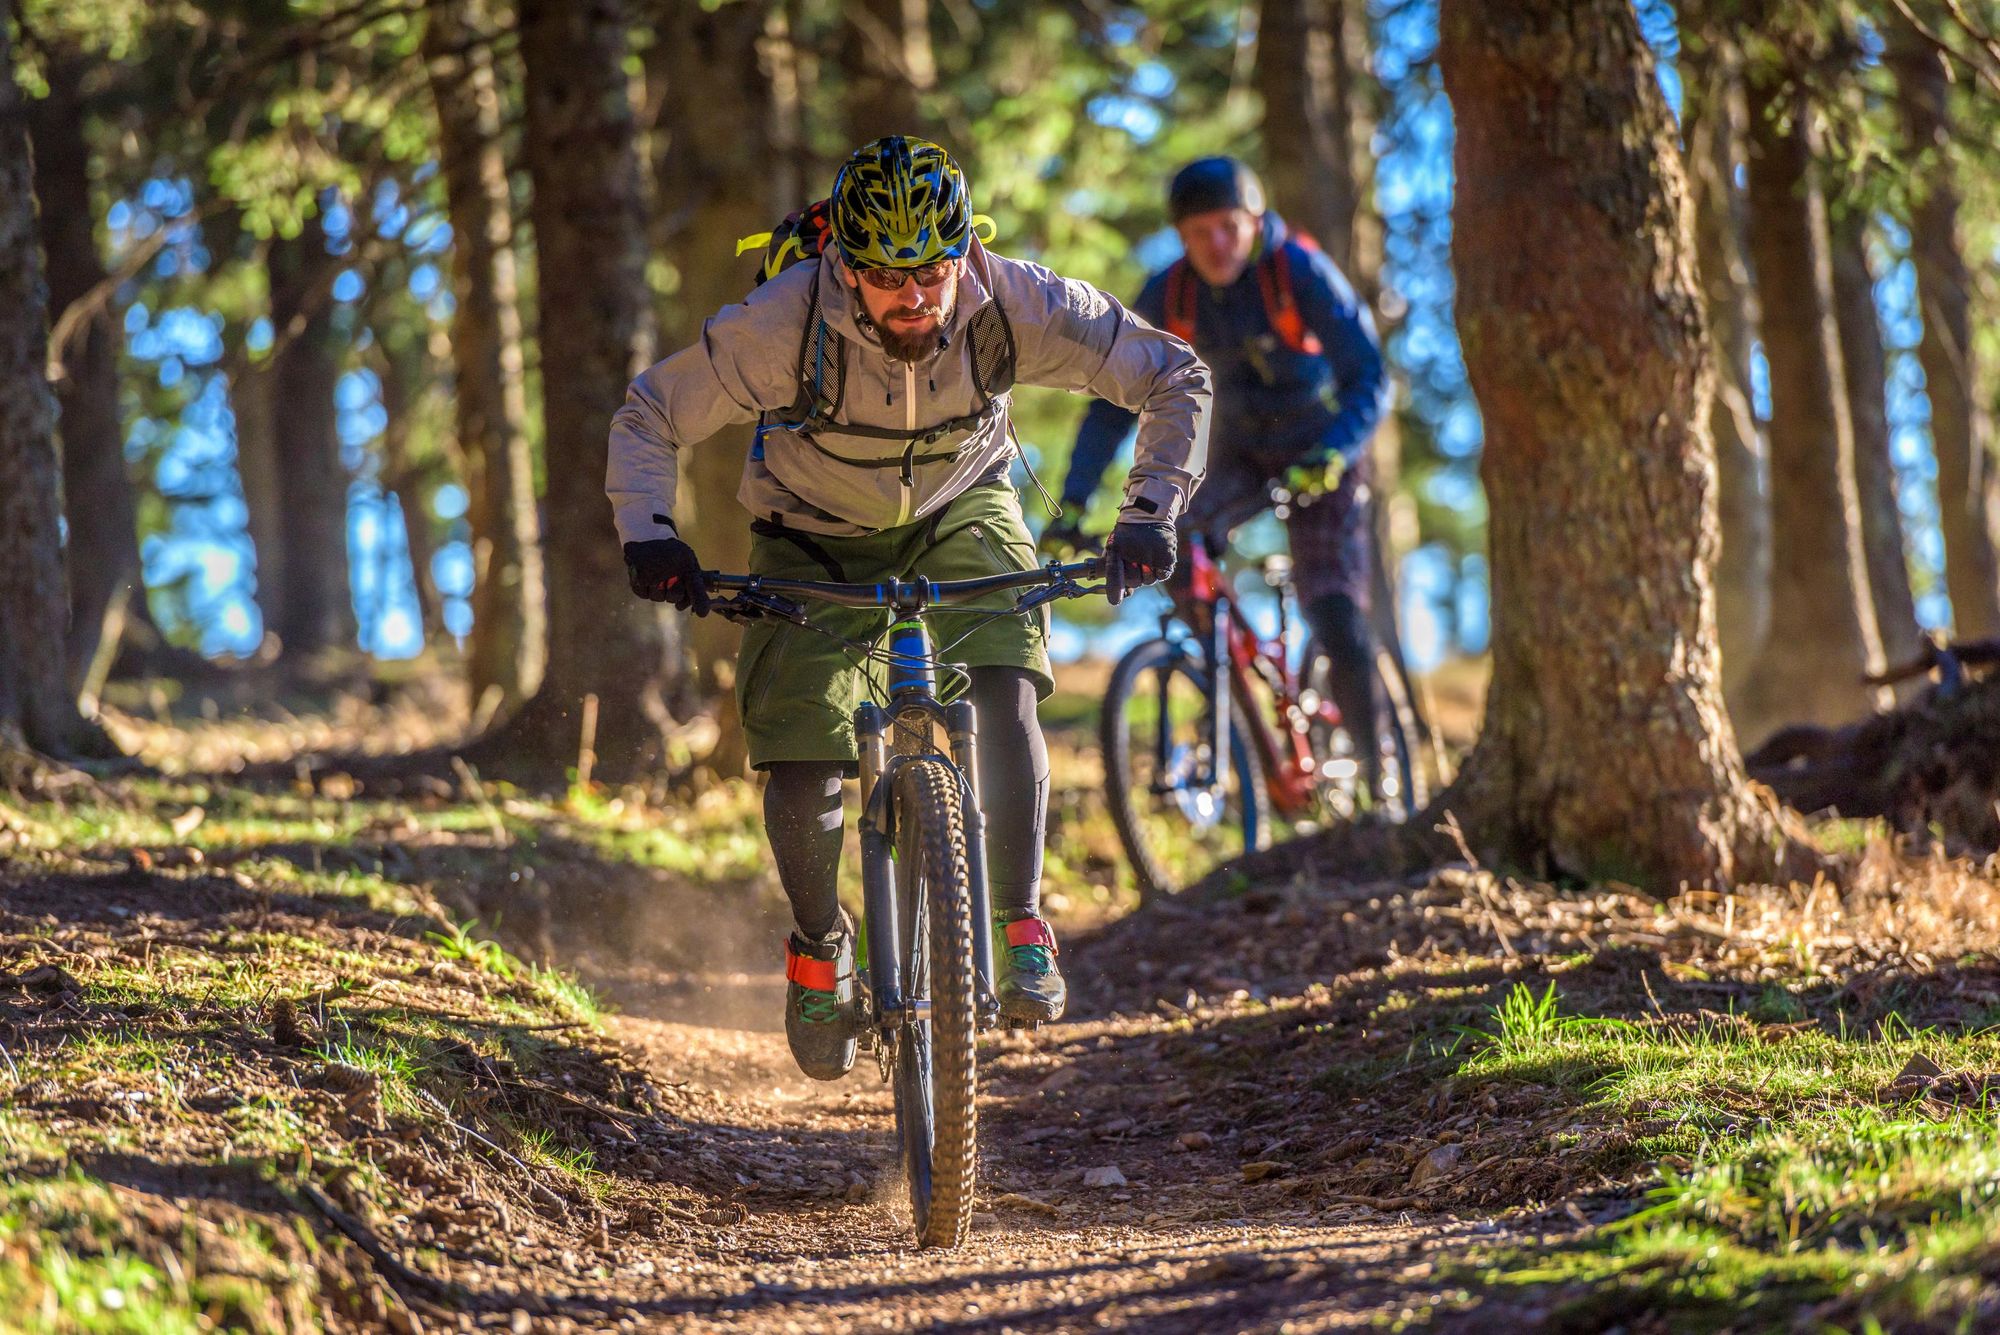 Two mountain bikers make their way down some trails in a forest. Photo: Getty